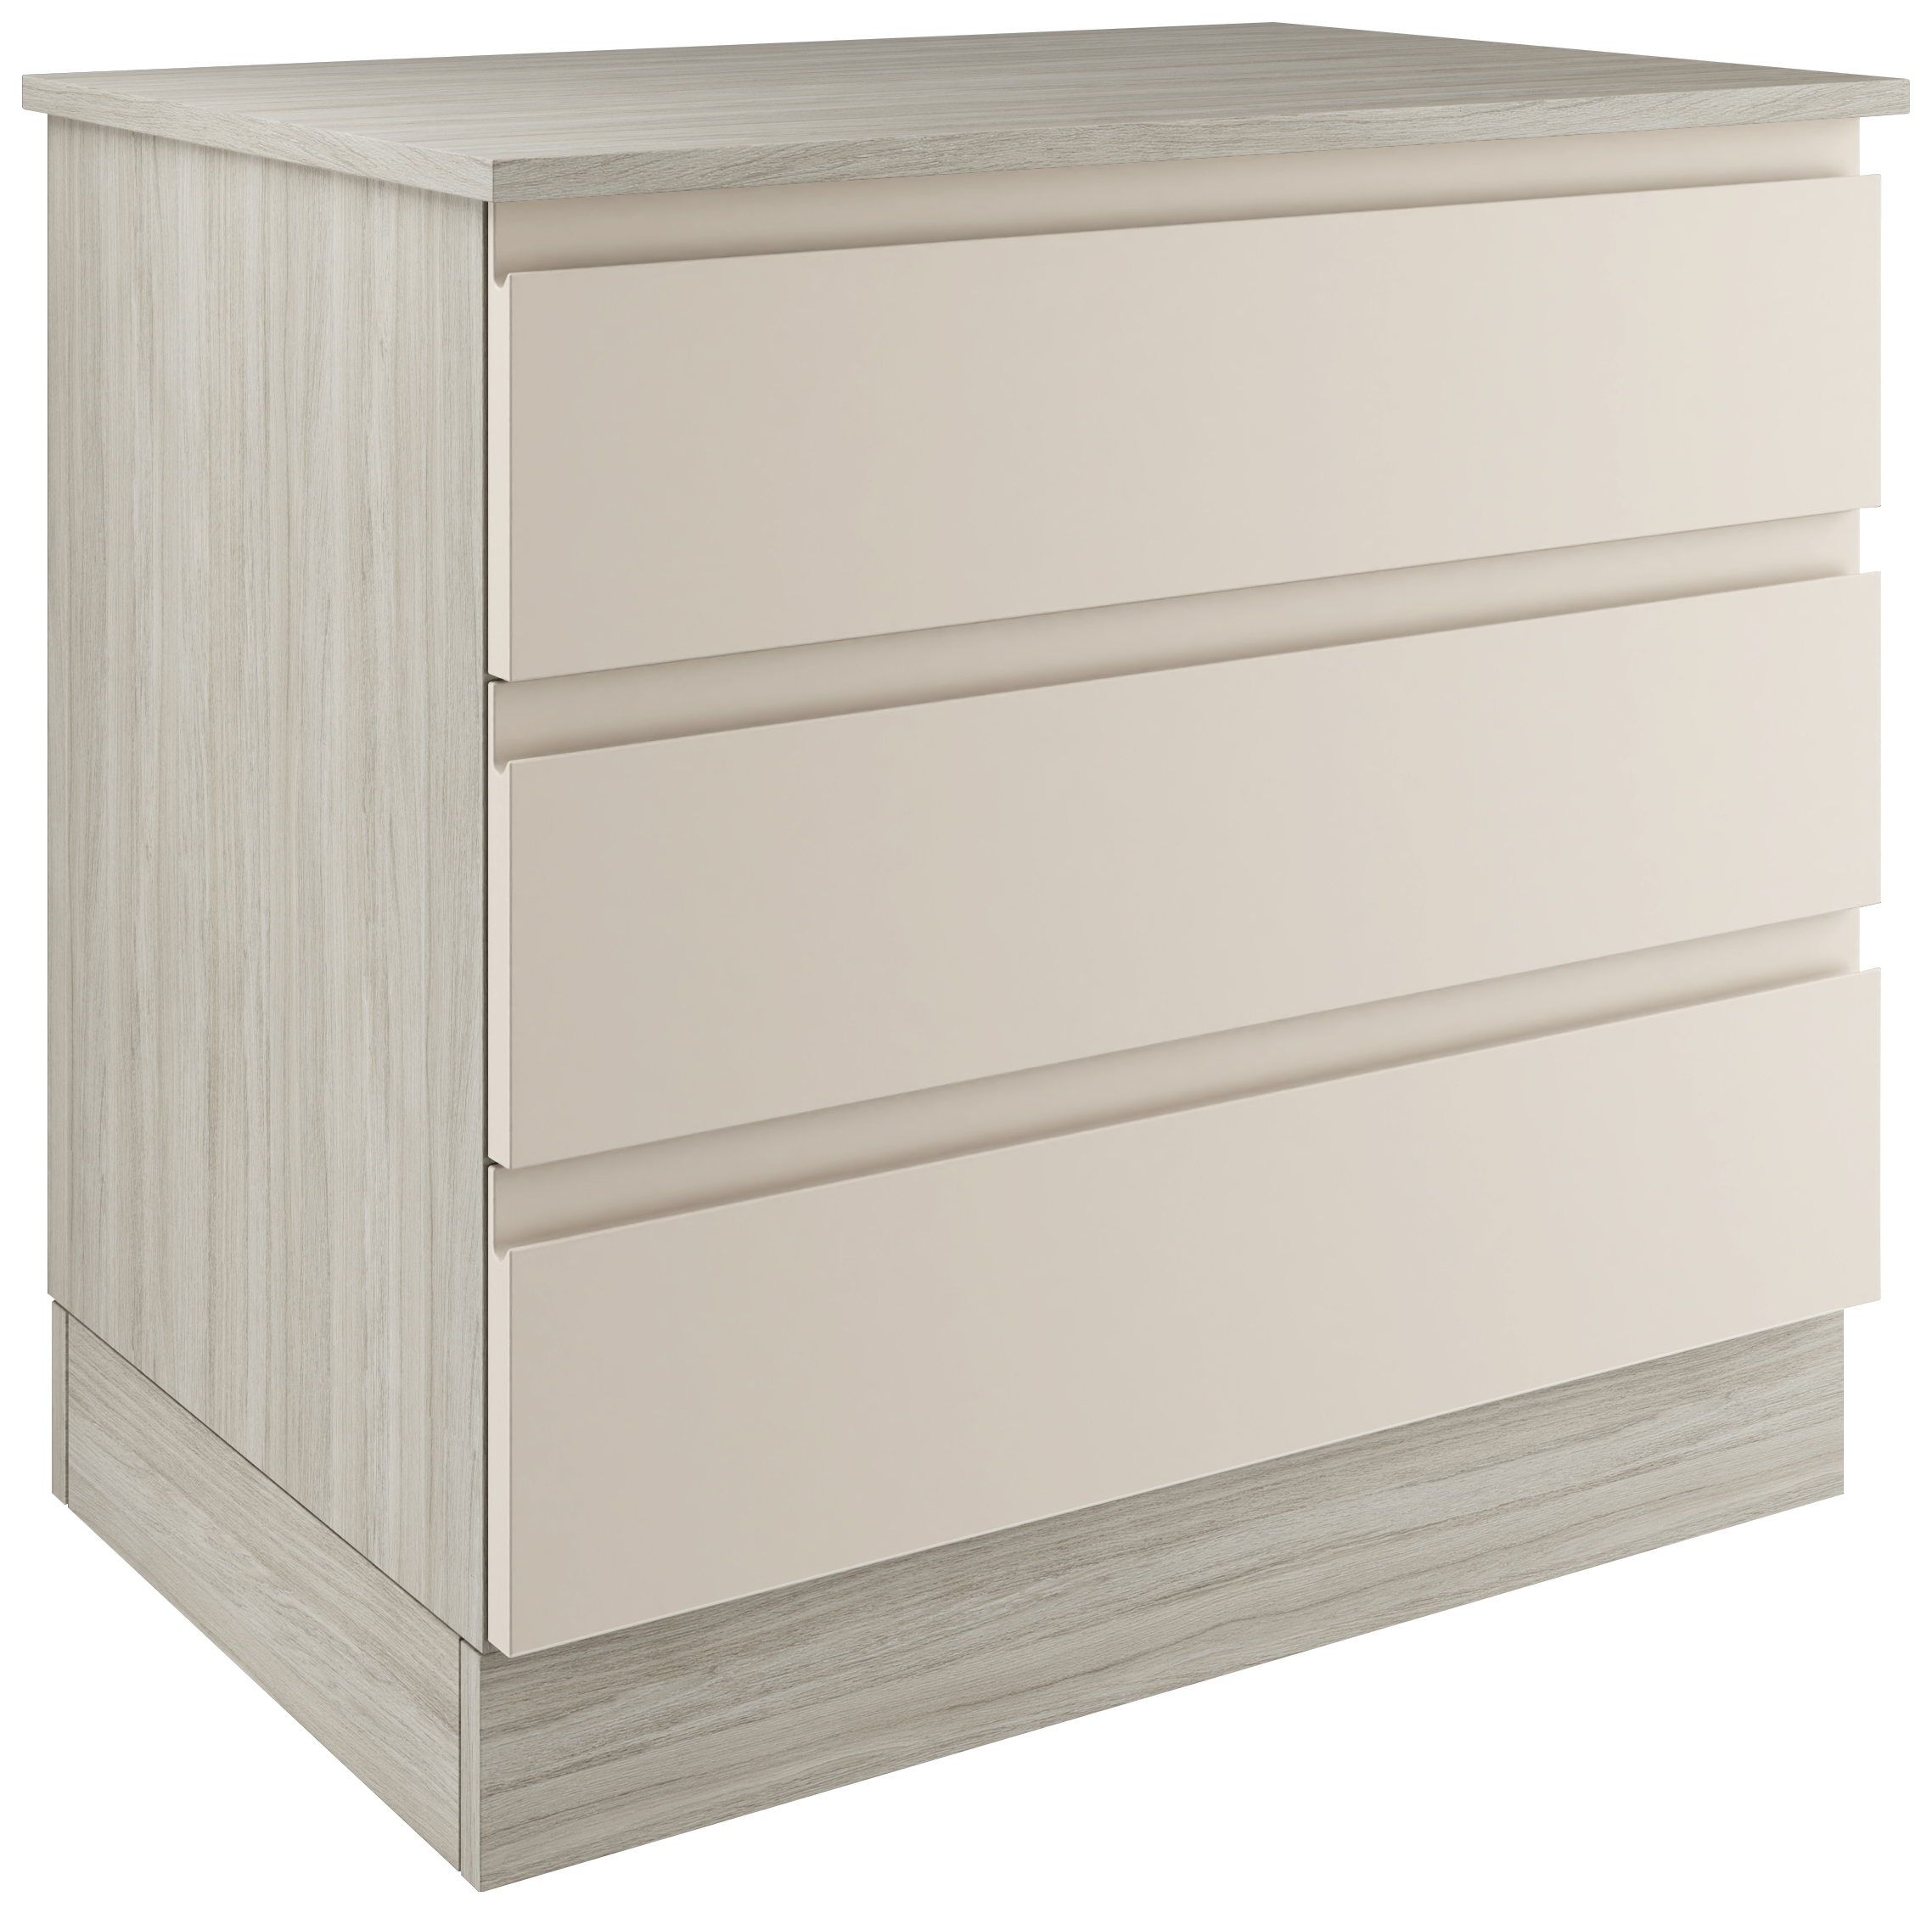 Boston Matt Cashmere Double Chest with 3 Drawers - 820 x 730 x 520mm